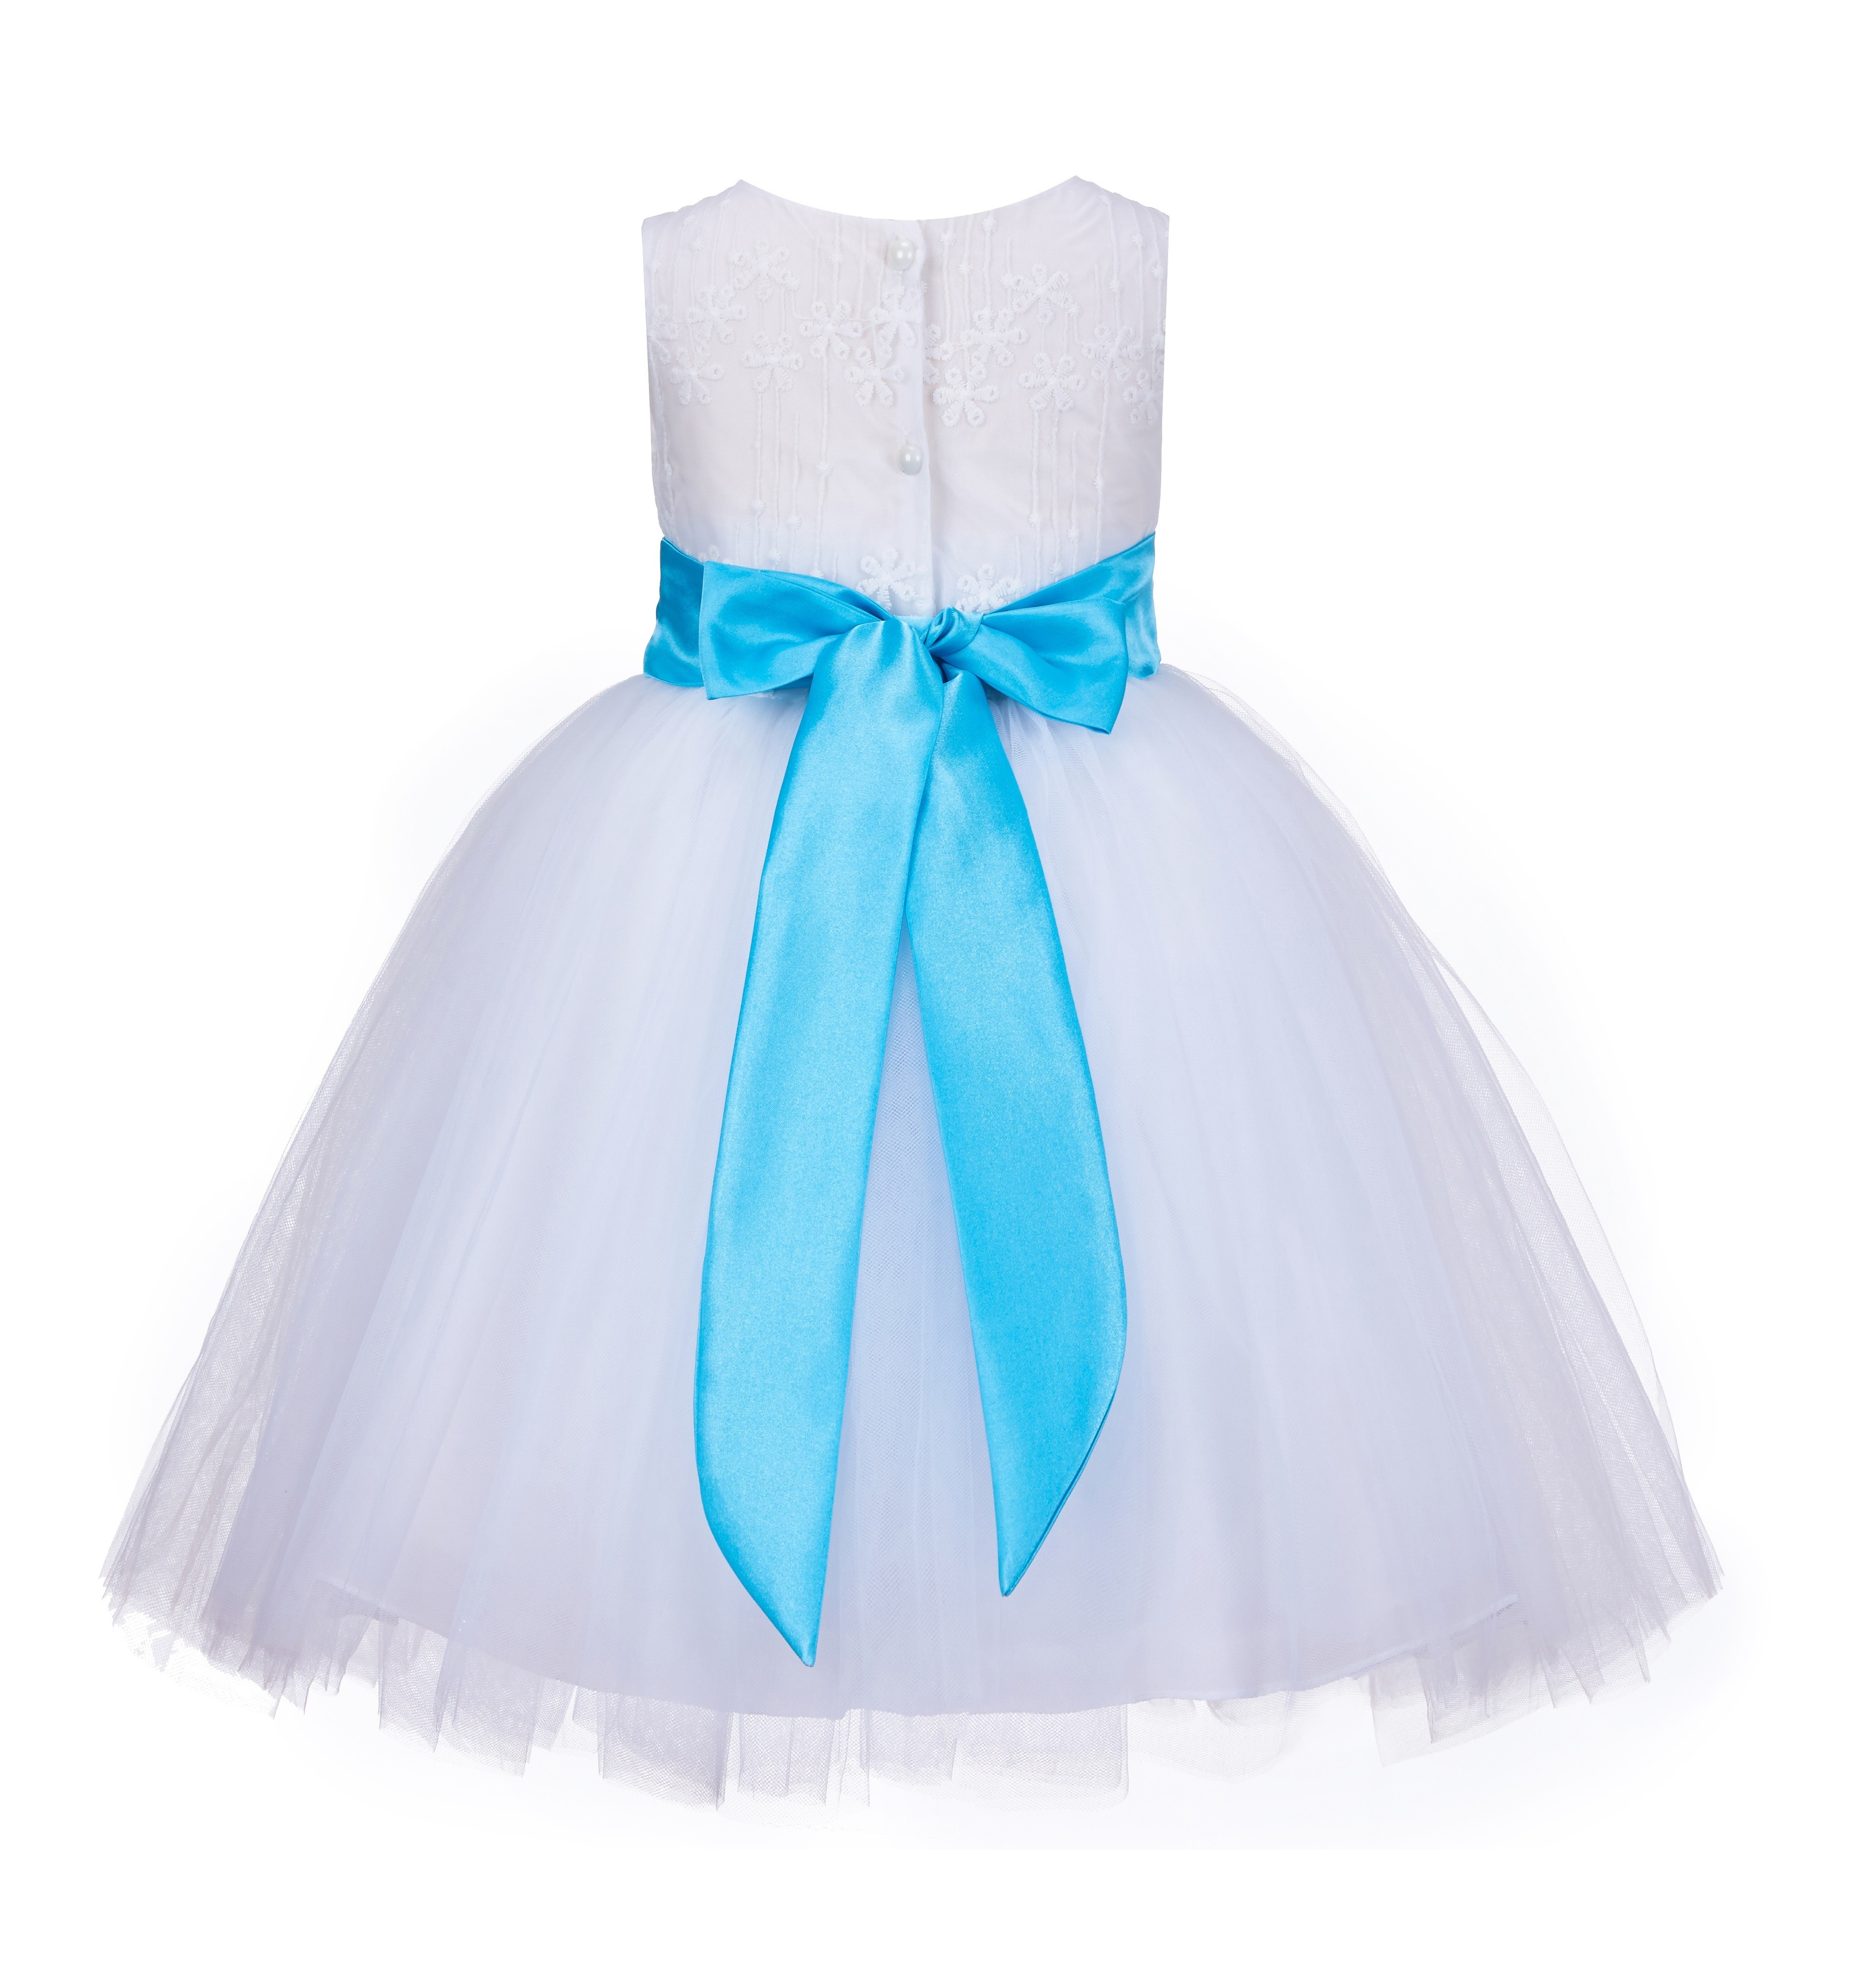 White/Turquoise Lace Embroidery Tulle Flower Girl Dress Wedding 118